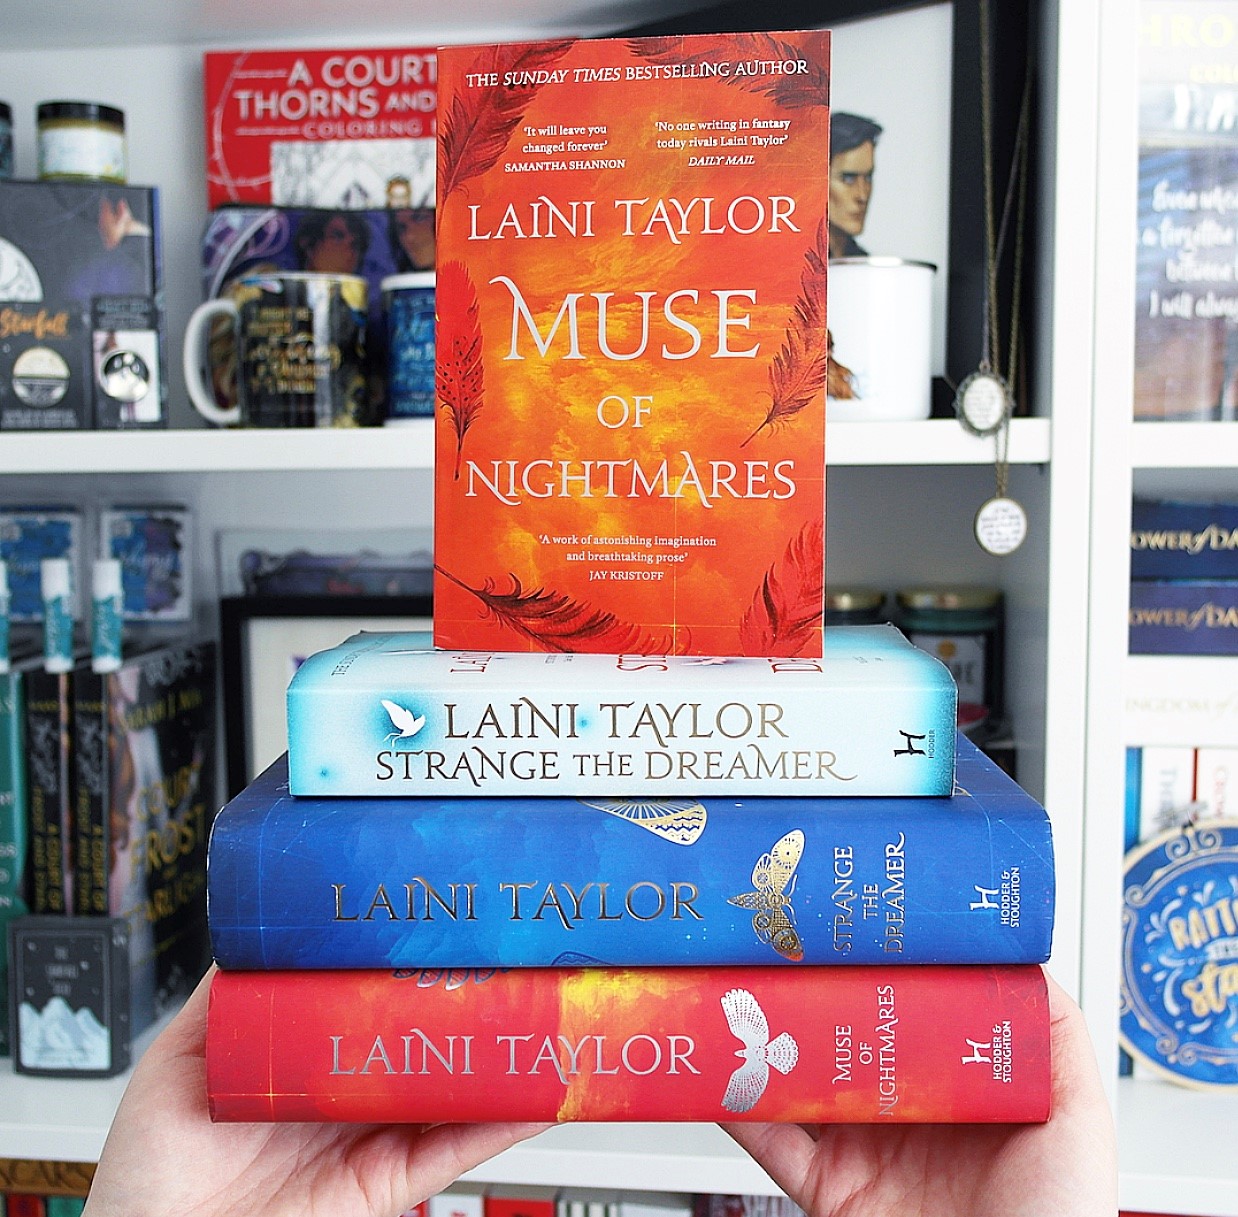 A stack of books by Laini Taylor. In order from top to bottom there is the red paperback edition of Muse of Nightmares stood on top of the blue paperback edition of Strange the Dreamer, the blue hardback edition of Strange the Dreamer and the red hardback edition of Muse of Nightmares. The last three books are stacked horizontally on top of one another.